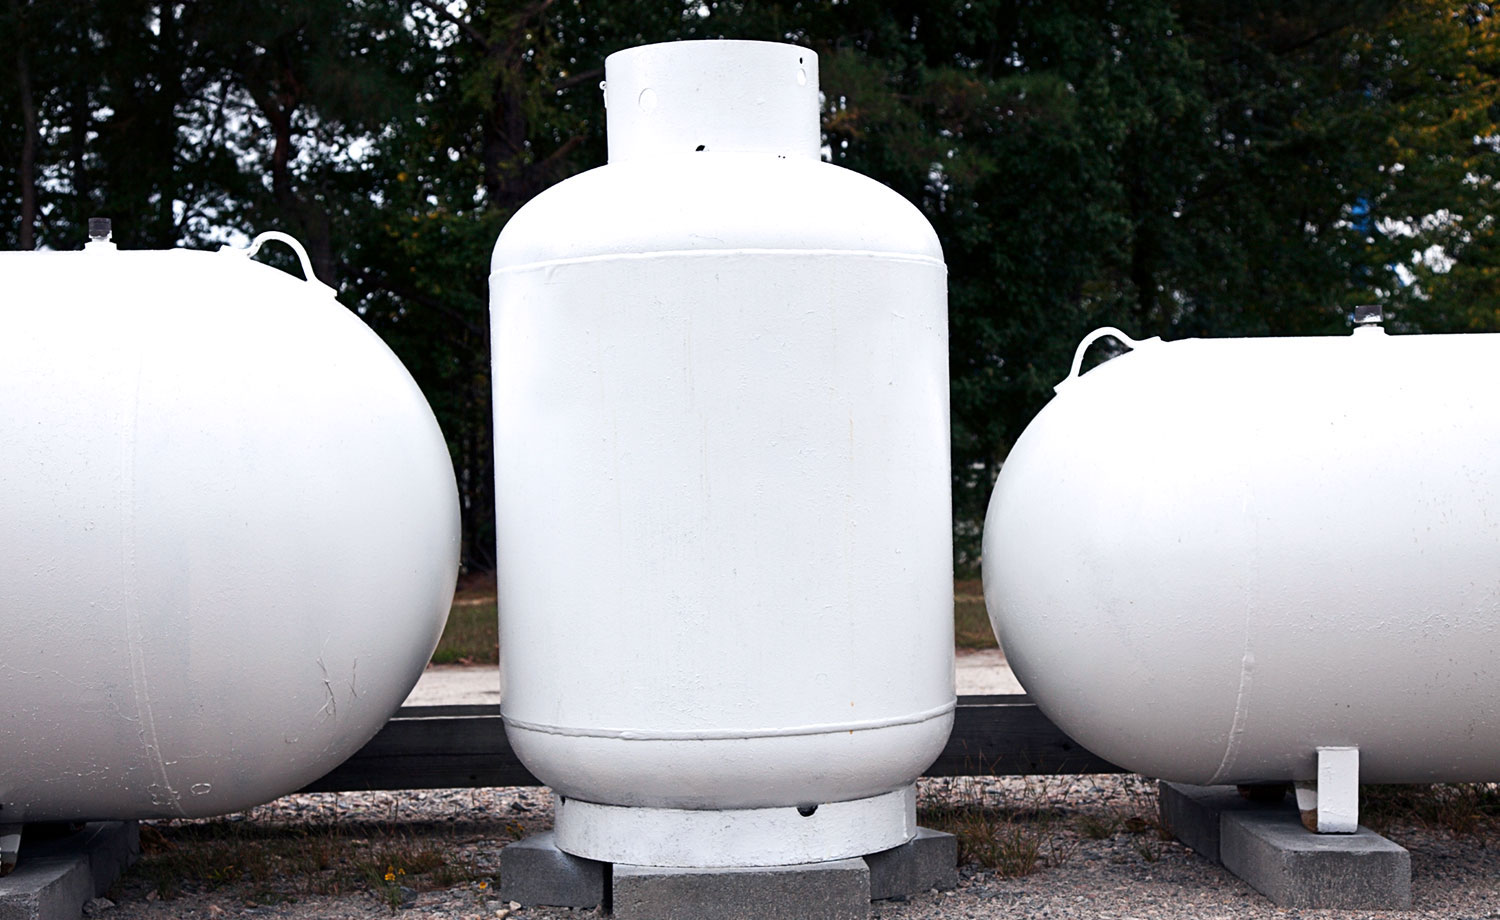 Supply, labor challenges shape propane tank production